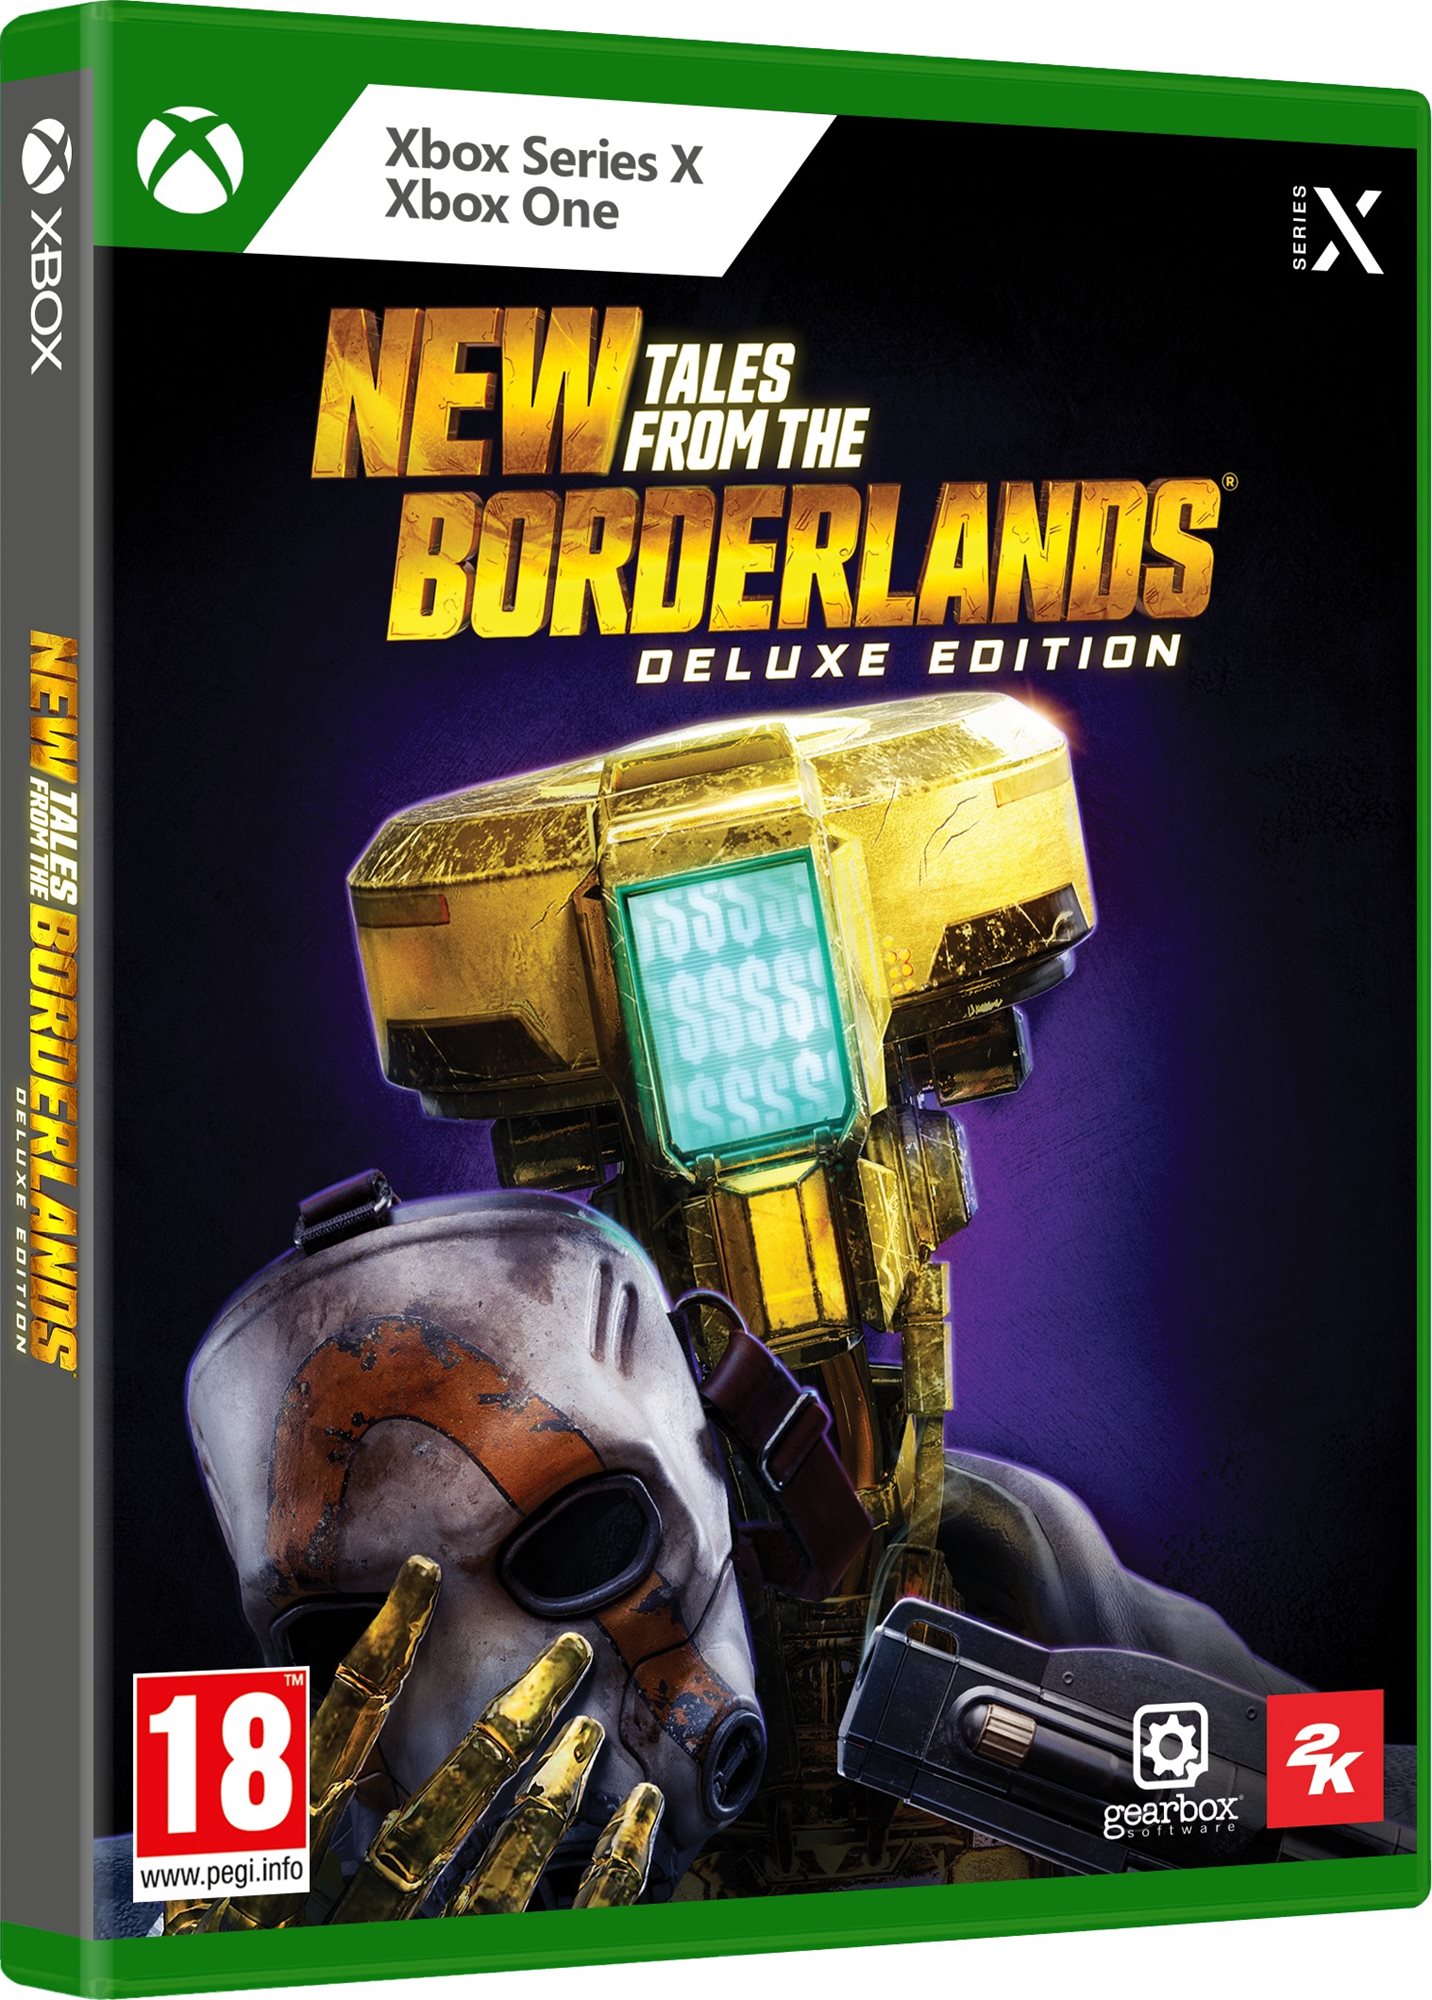 New Tales from the Borderlands: Deluxe Edition - Xbox Series